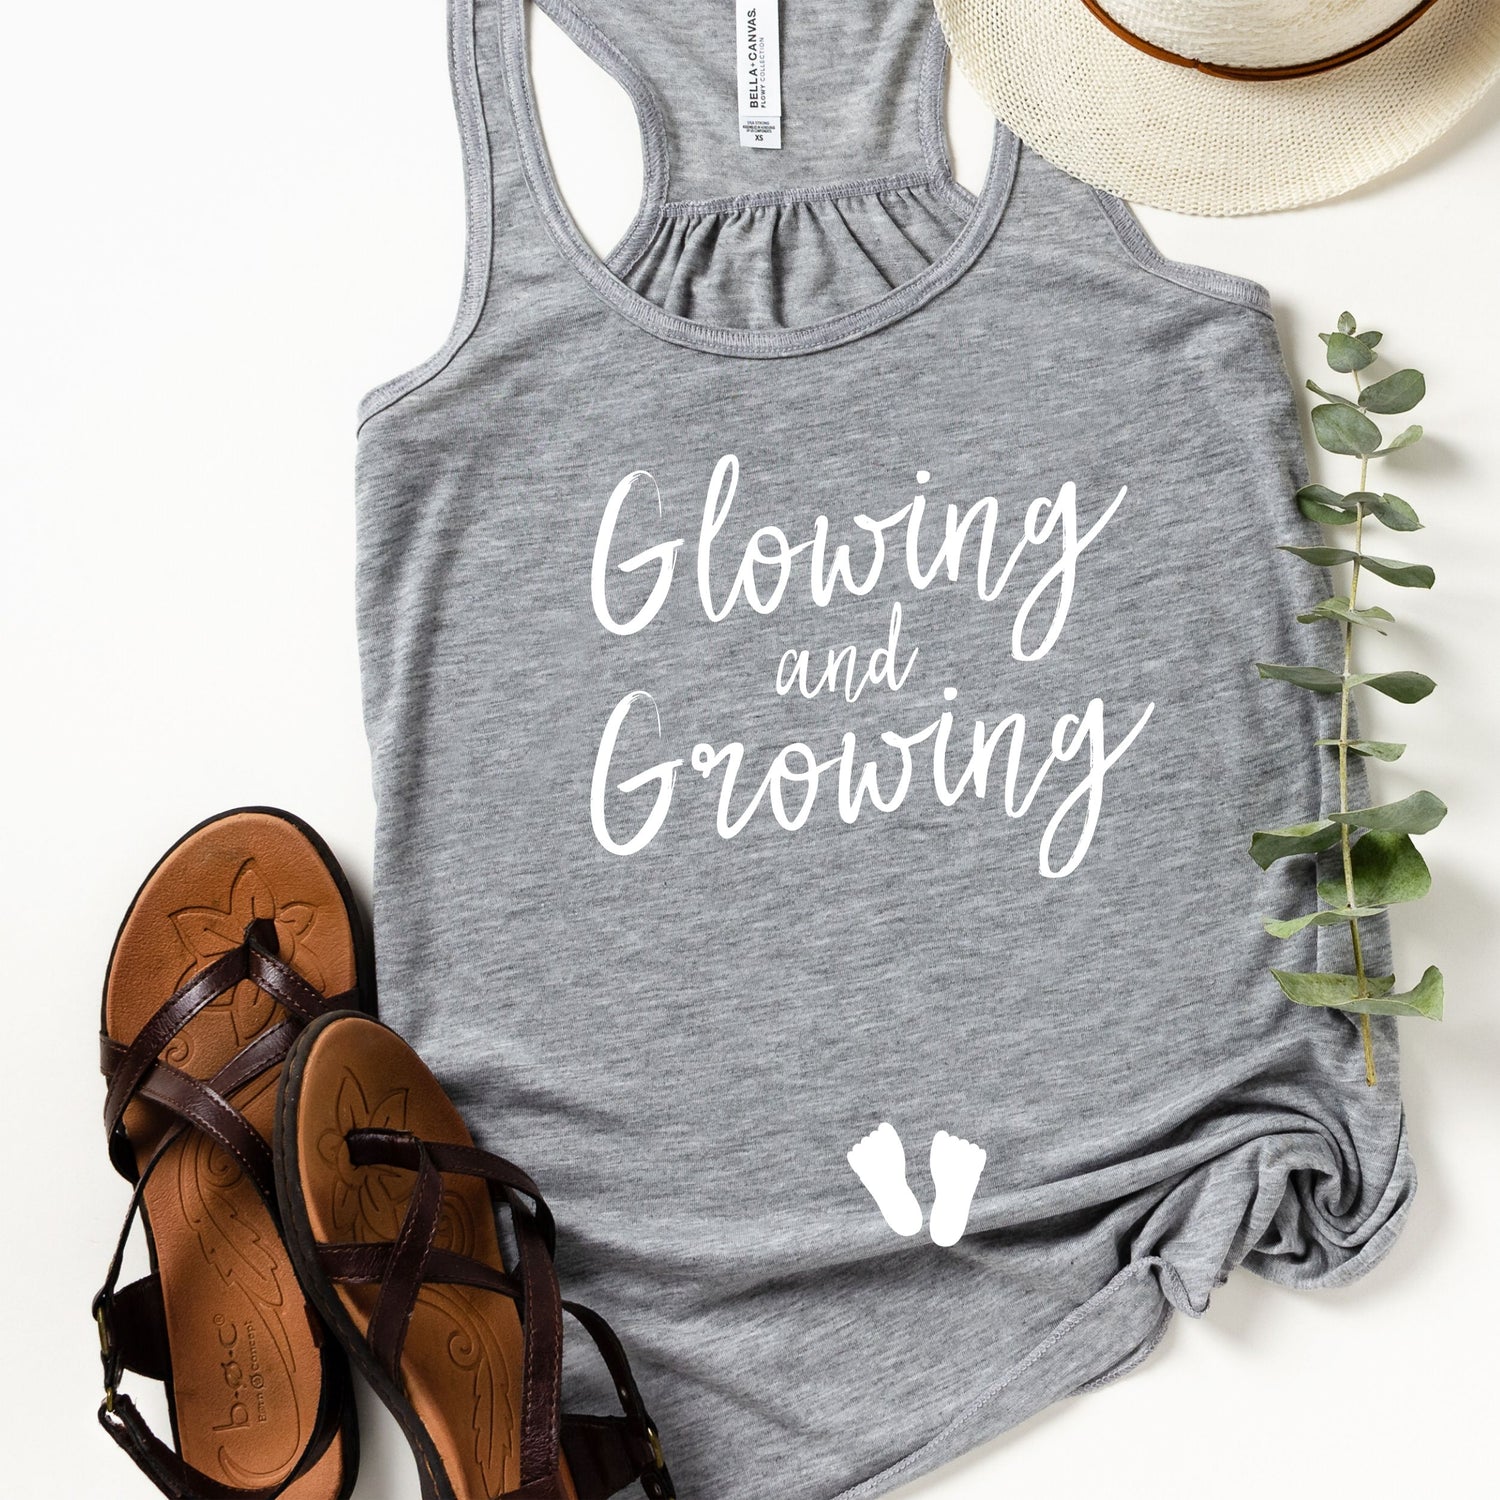 Glowing And Growing Pregnant Tank Top Maternity Clothes - Teegarb